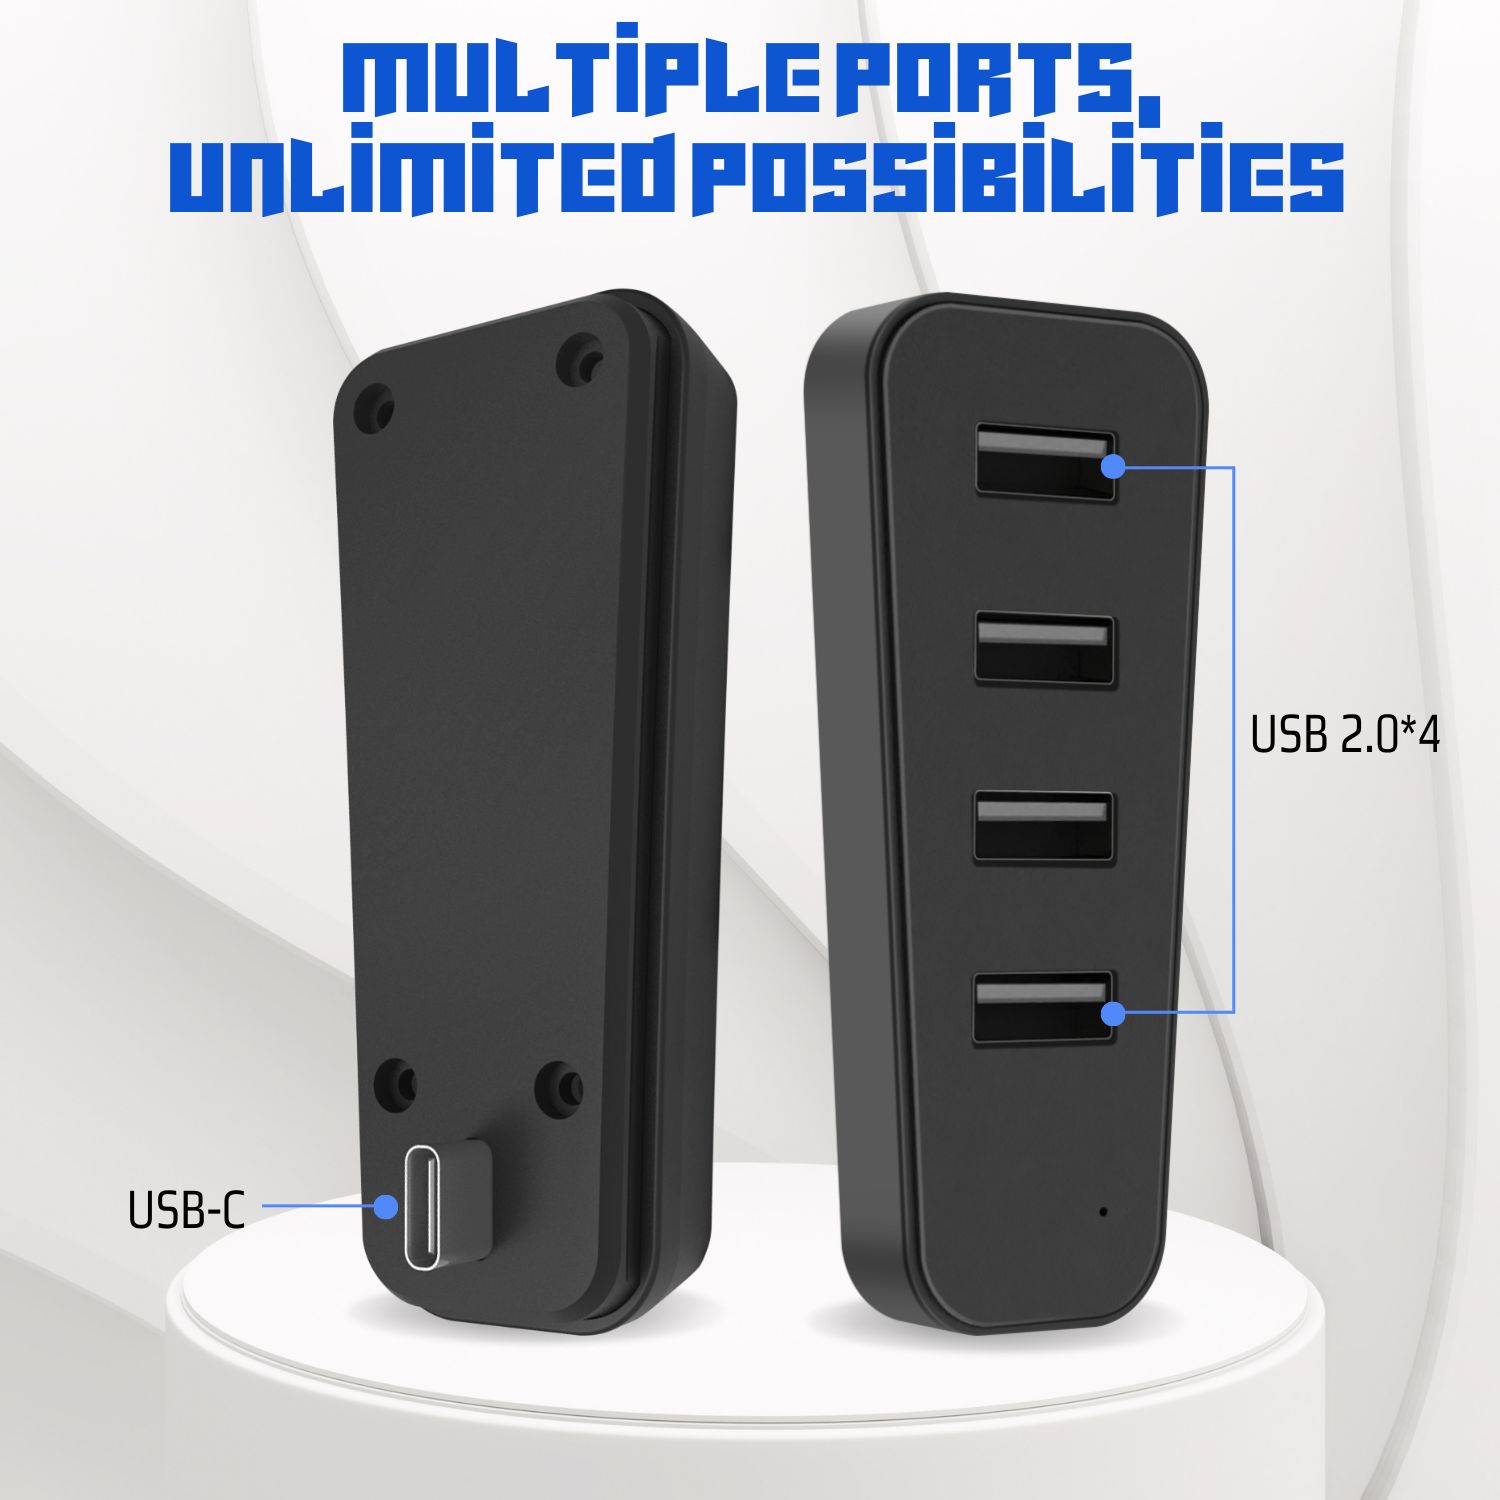 Plug & Play: Our fast and reliable USB extender for PS5 Slim console offers simplicity. Just plug and play; when the hub is connected to the console, no driver is needed. Always ready to maximize your gaming sessions